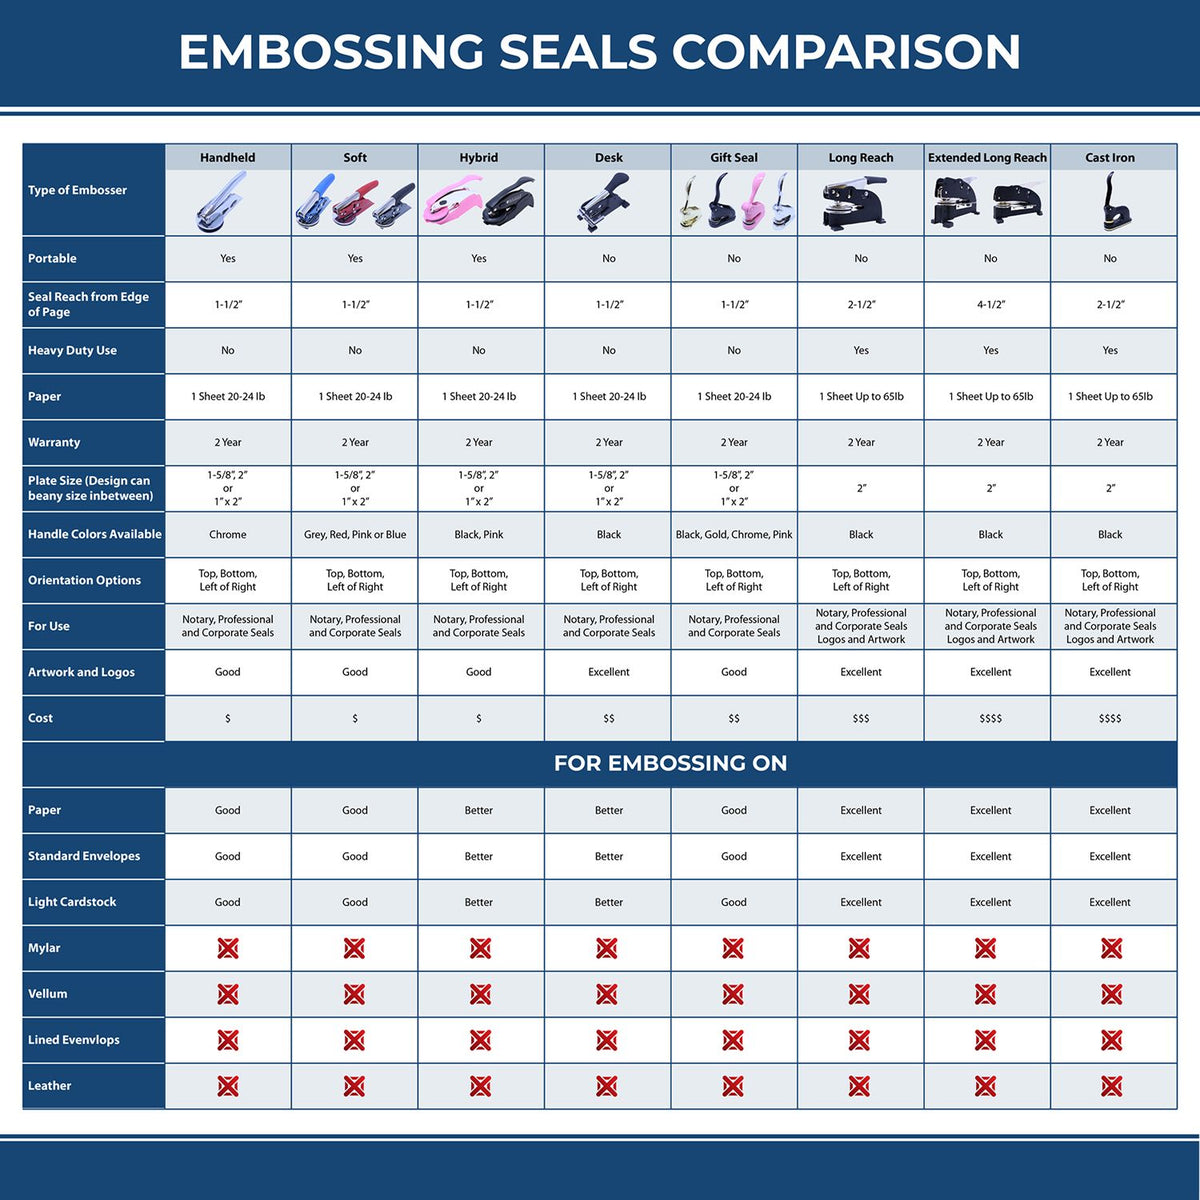 A comparison chart for the different types of mount models available for the Heavy Duty Cast Iron New Mexico Geologist Seal Embosser